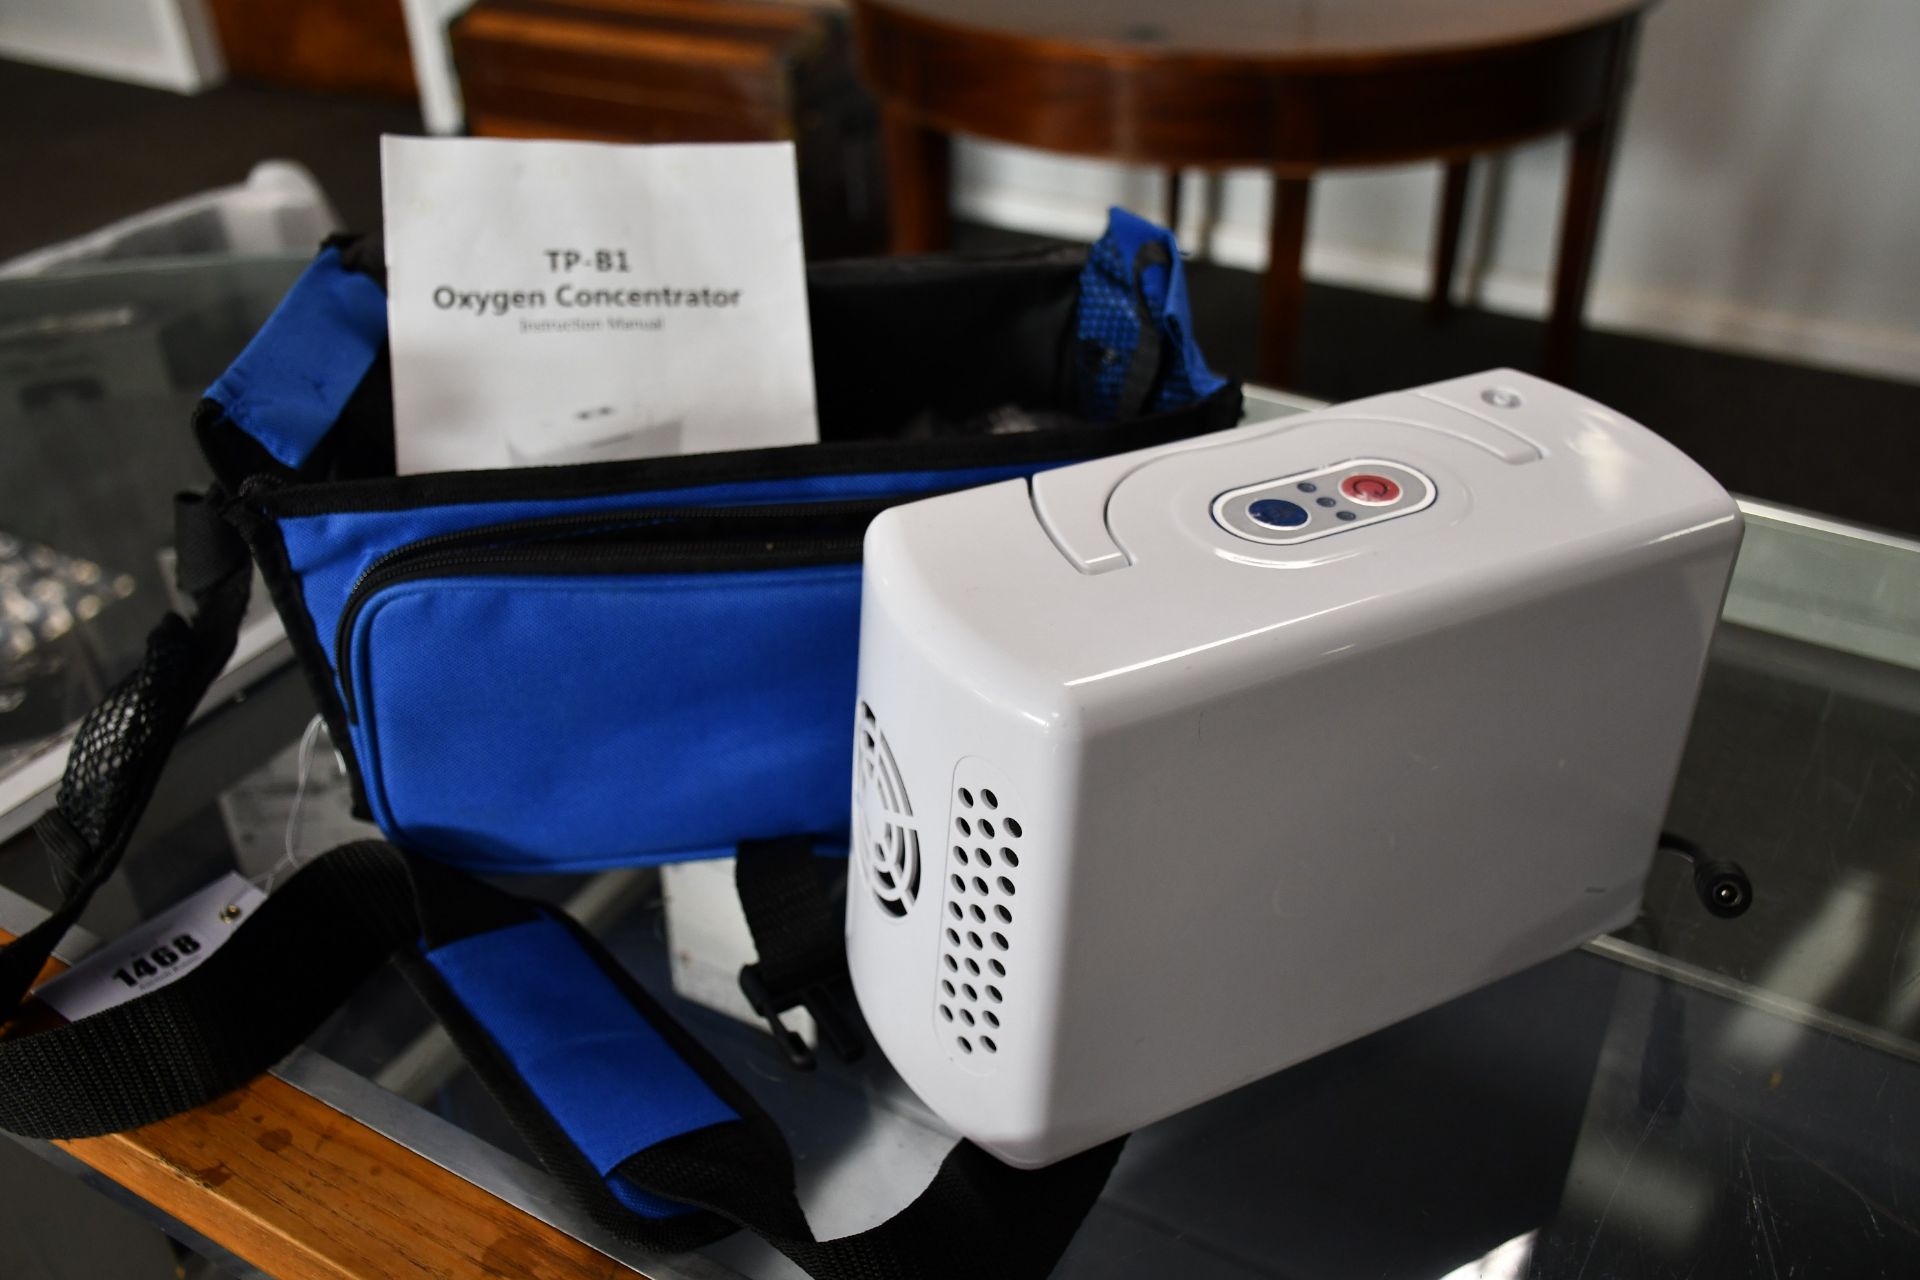 A pre owned TP-B1 Portable Oxygen Concentrator with power supply and carry bag.